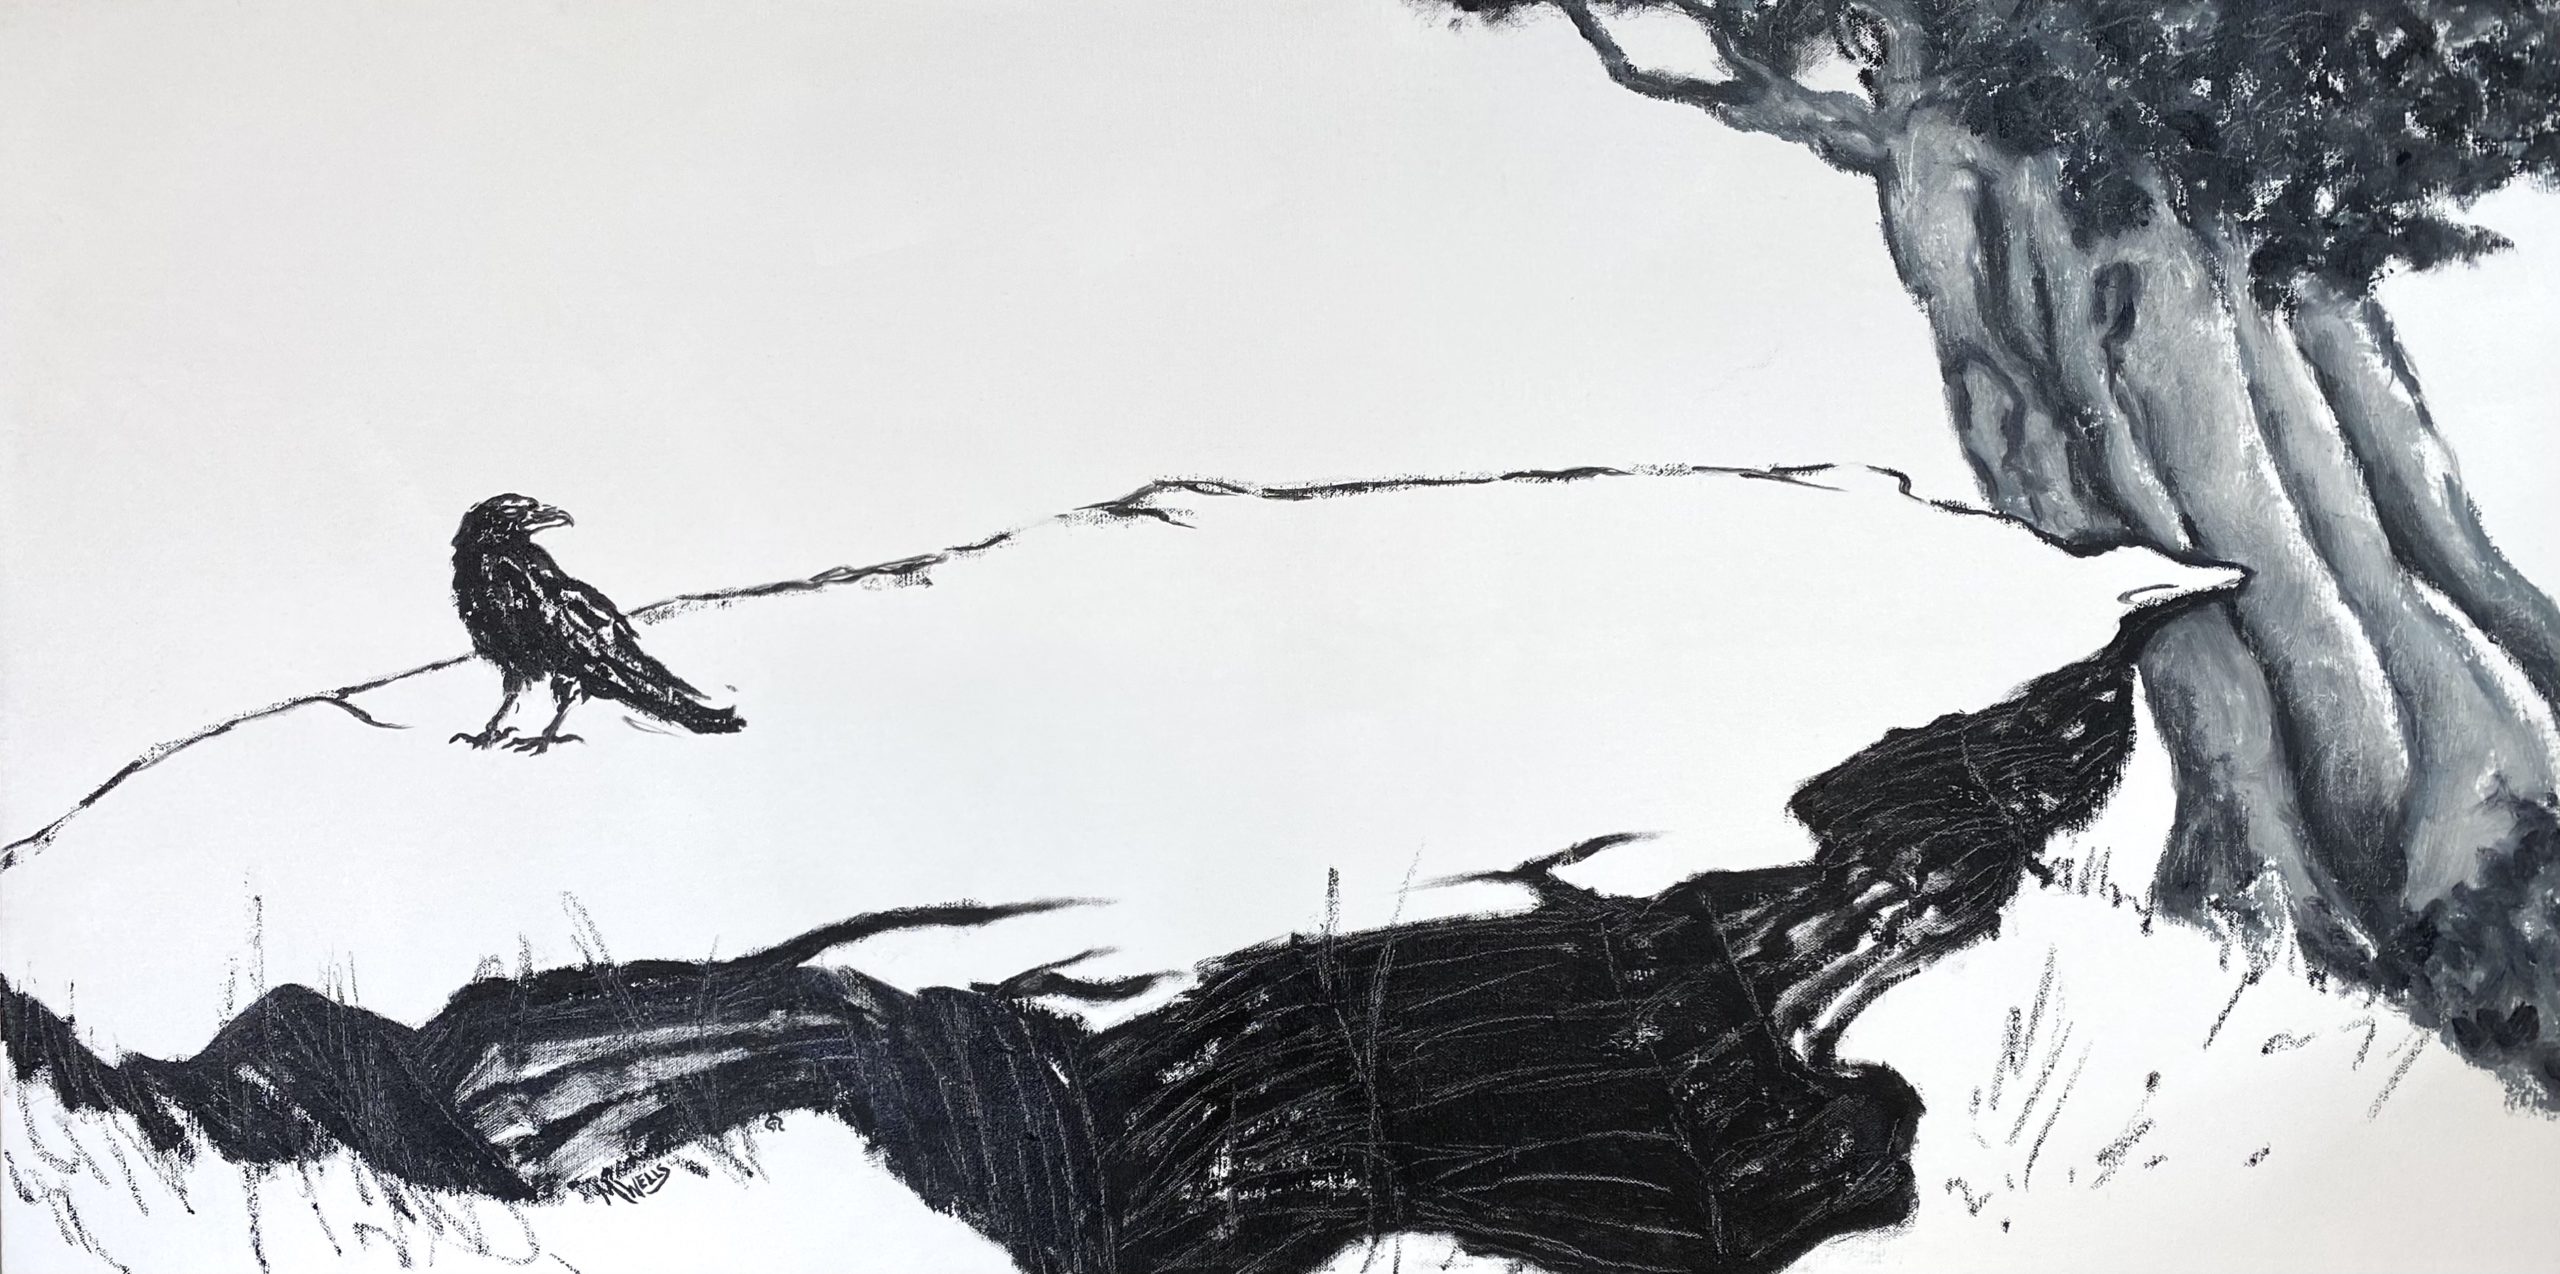 sumi e oil by Marilyn Wells "Raven"